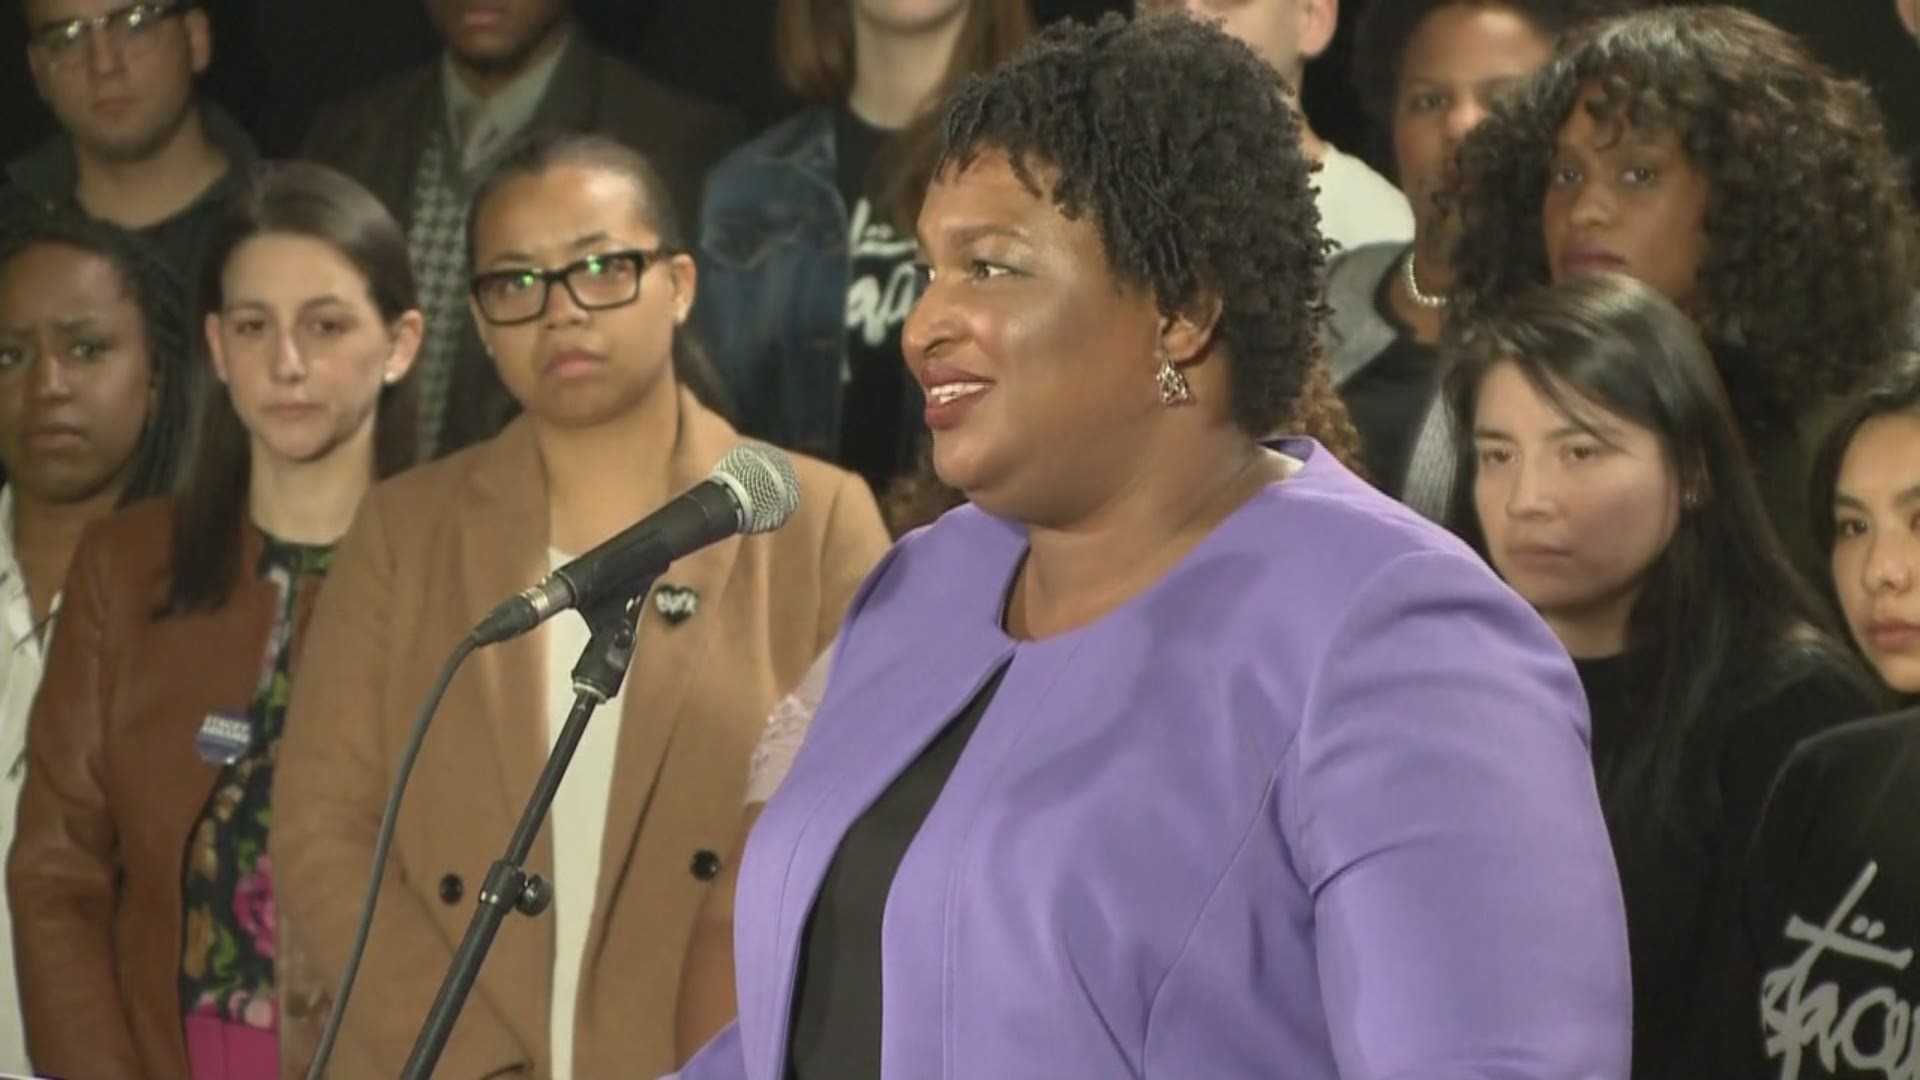 Democrat Stacey Abrams says she can't win Georgia governor race, effectively ending her challenge to Republican Brian Kemp.